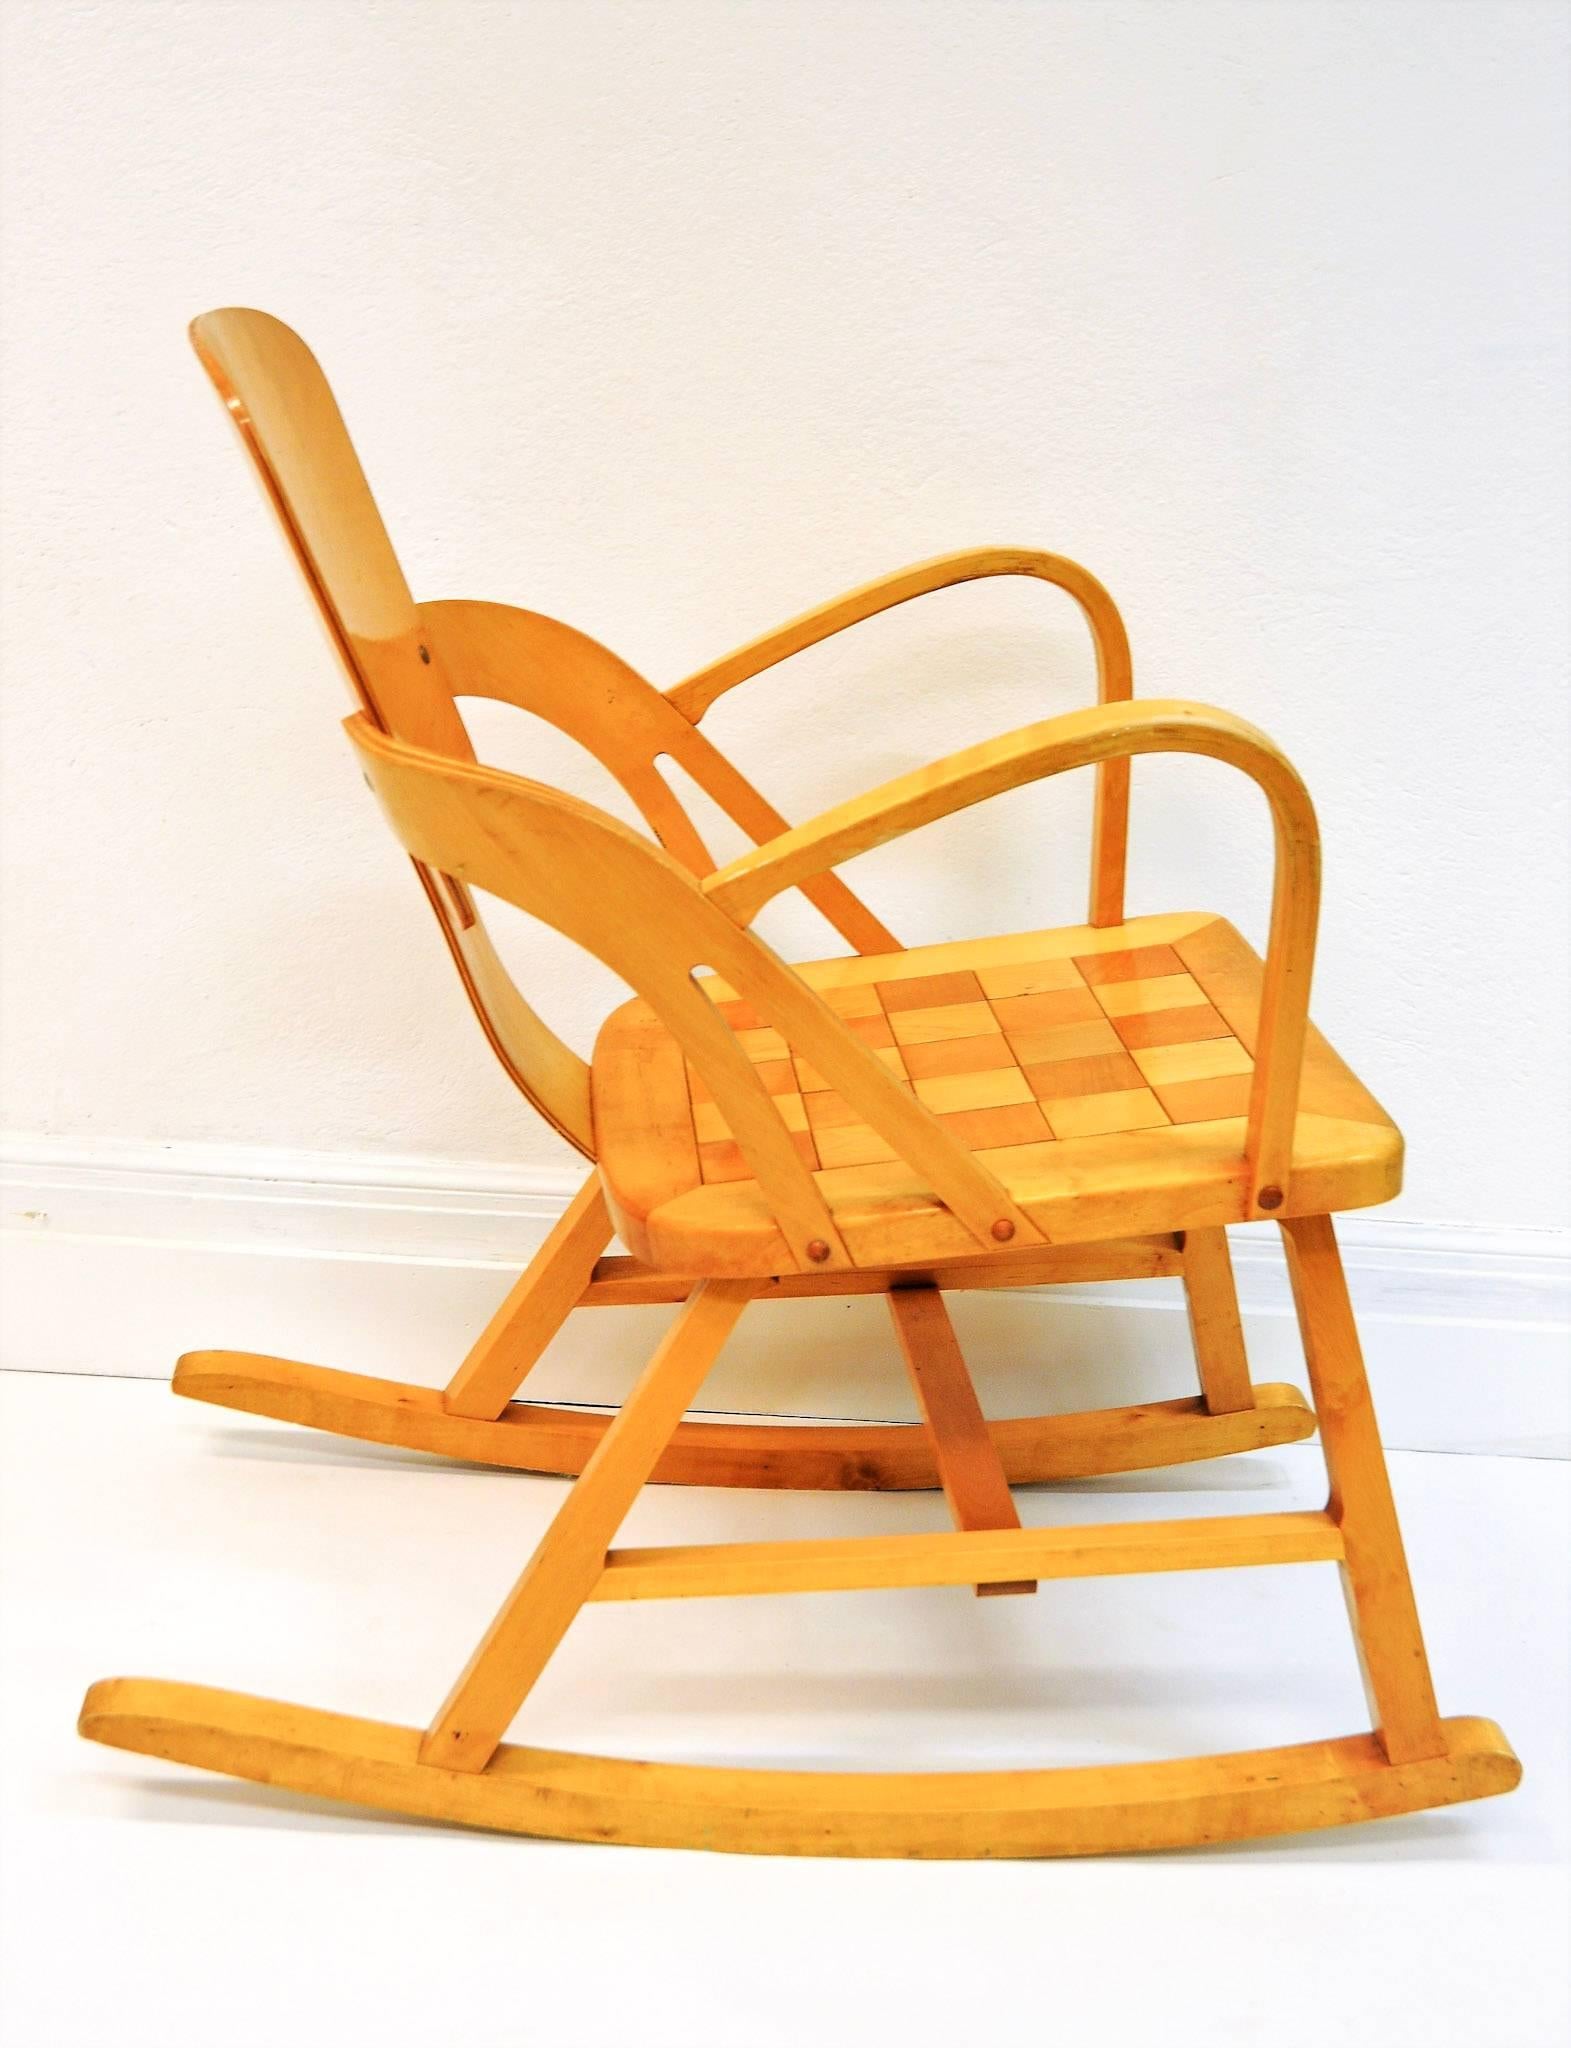 The popular Per Aaslid Rocking chair. With beautiful chesspatterns on the seat. Designed and produced by Per Aaslid (1937-1972). Aaslid Møbelfabrikk 1940/50`s. Seatheight: 38 cmH, seatwidth: 42 cm. The rockingchair is also called the